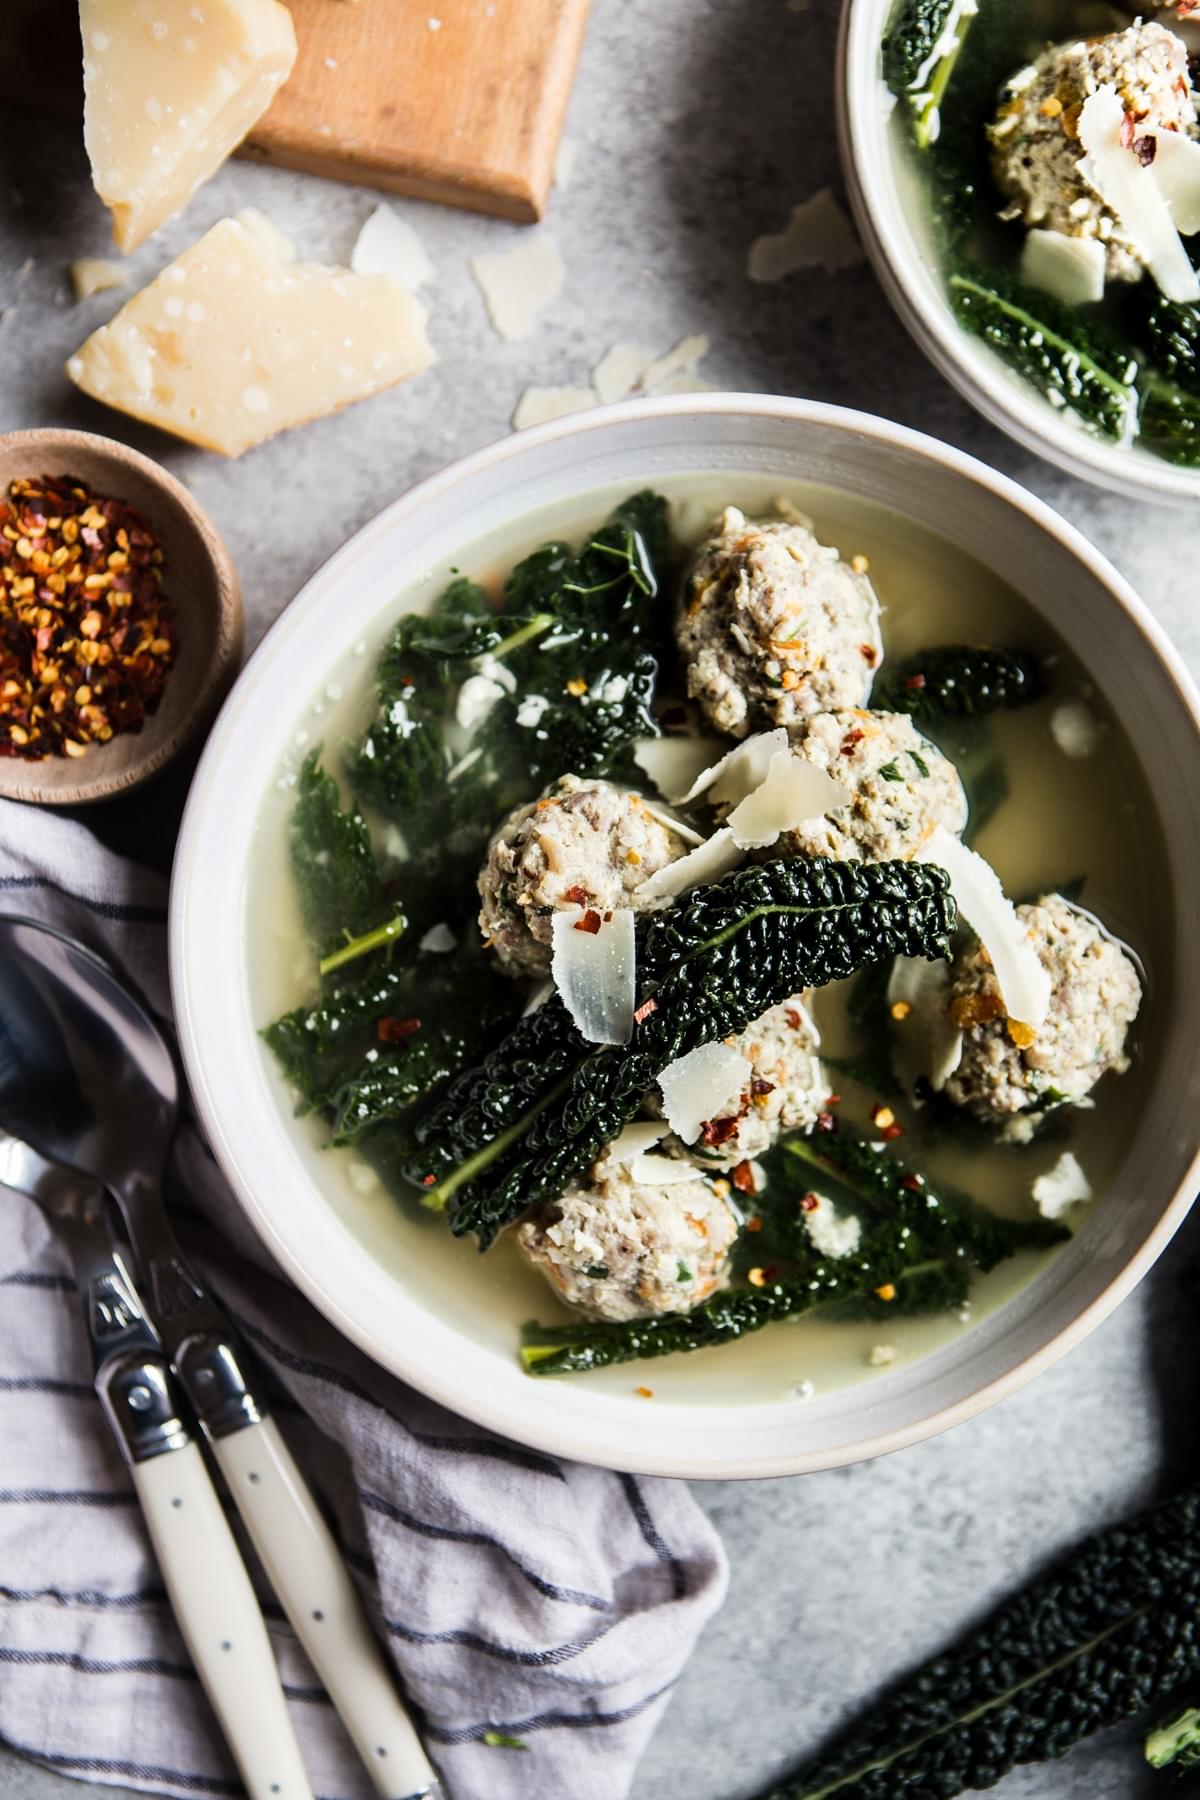 Homemade Italian wedding soup in a bowl with kale and meatballs